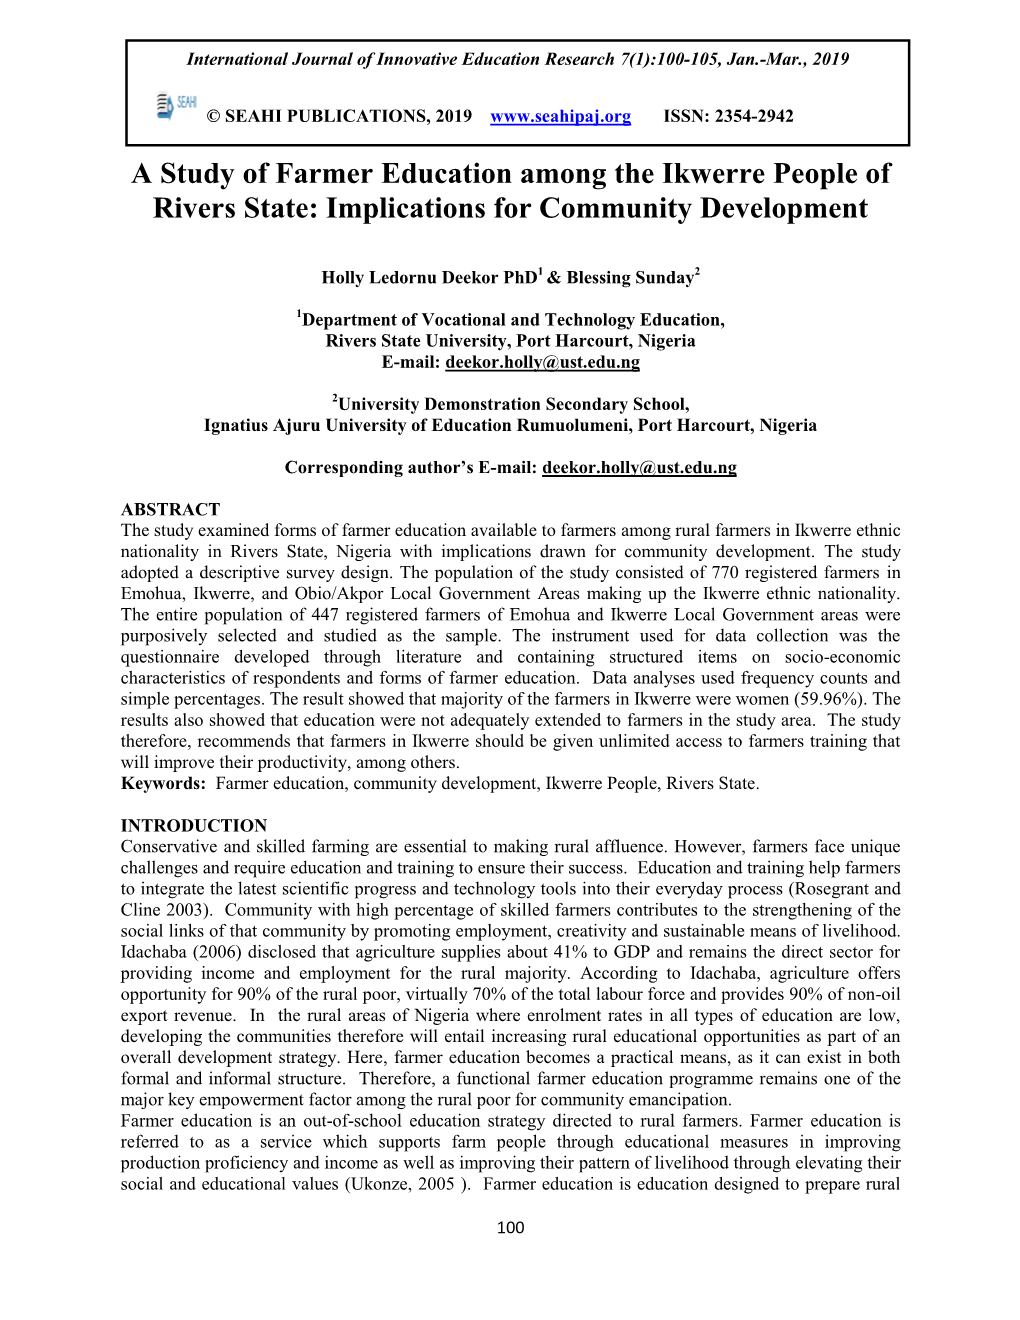 A Study of Farmer Education Among the Ikwerre People of Rivers State: Implications for Community Development